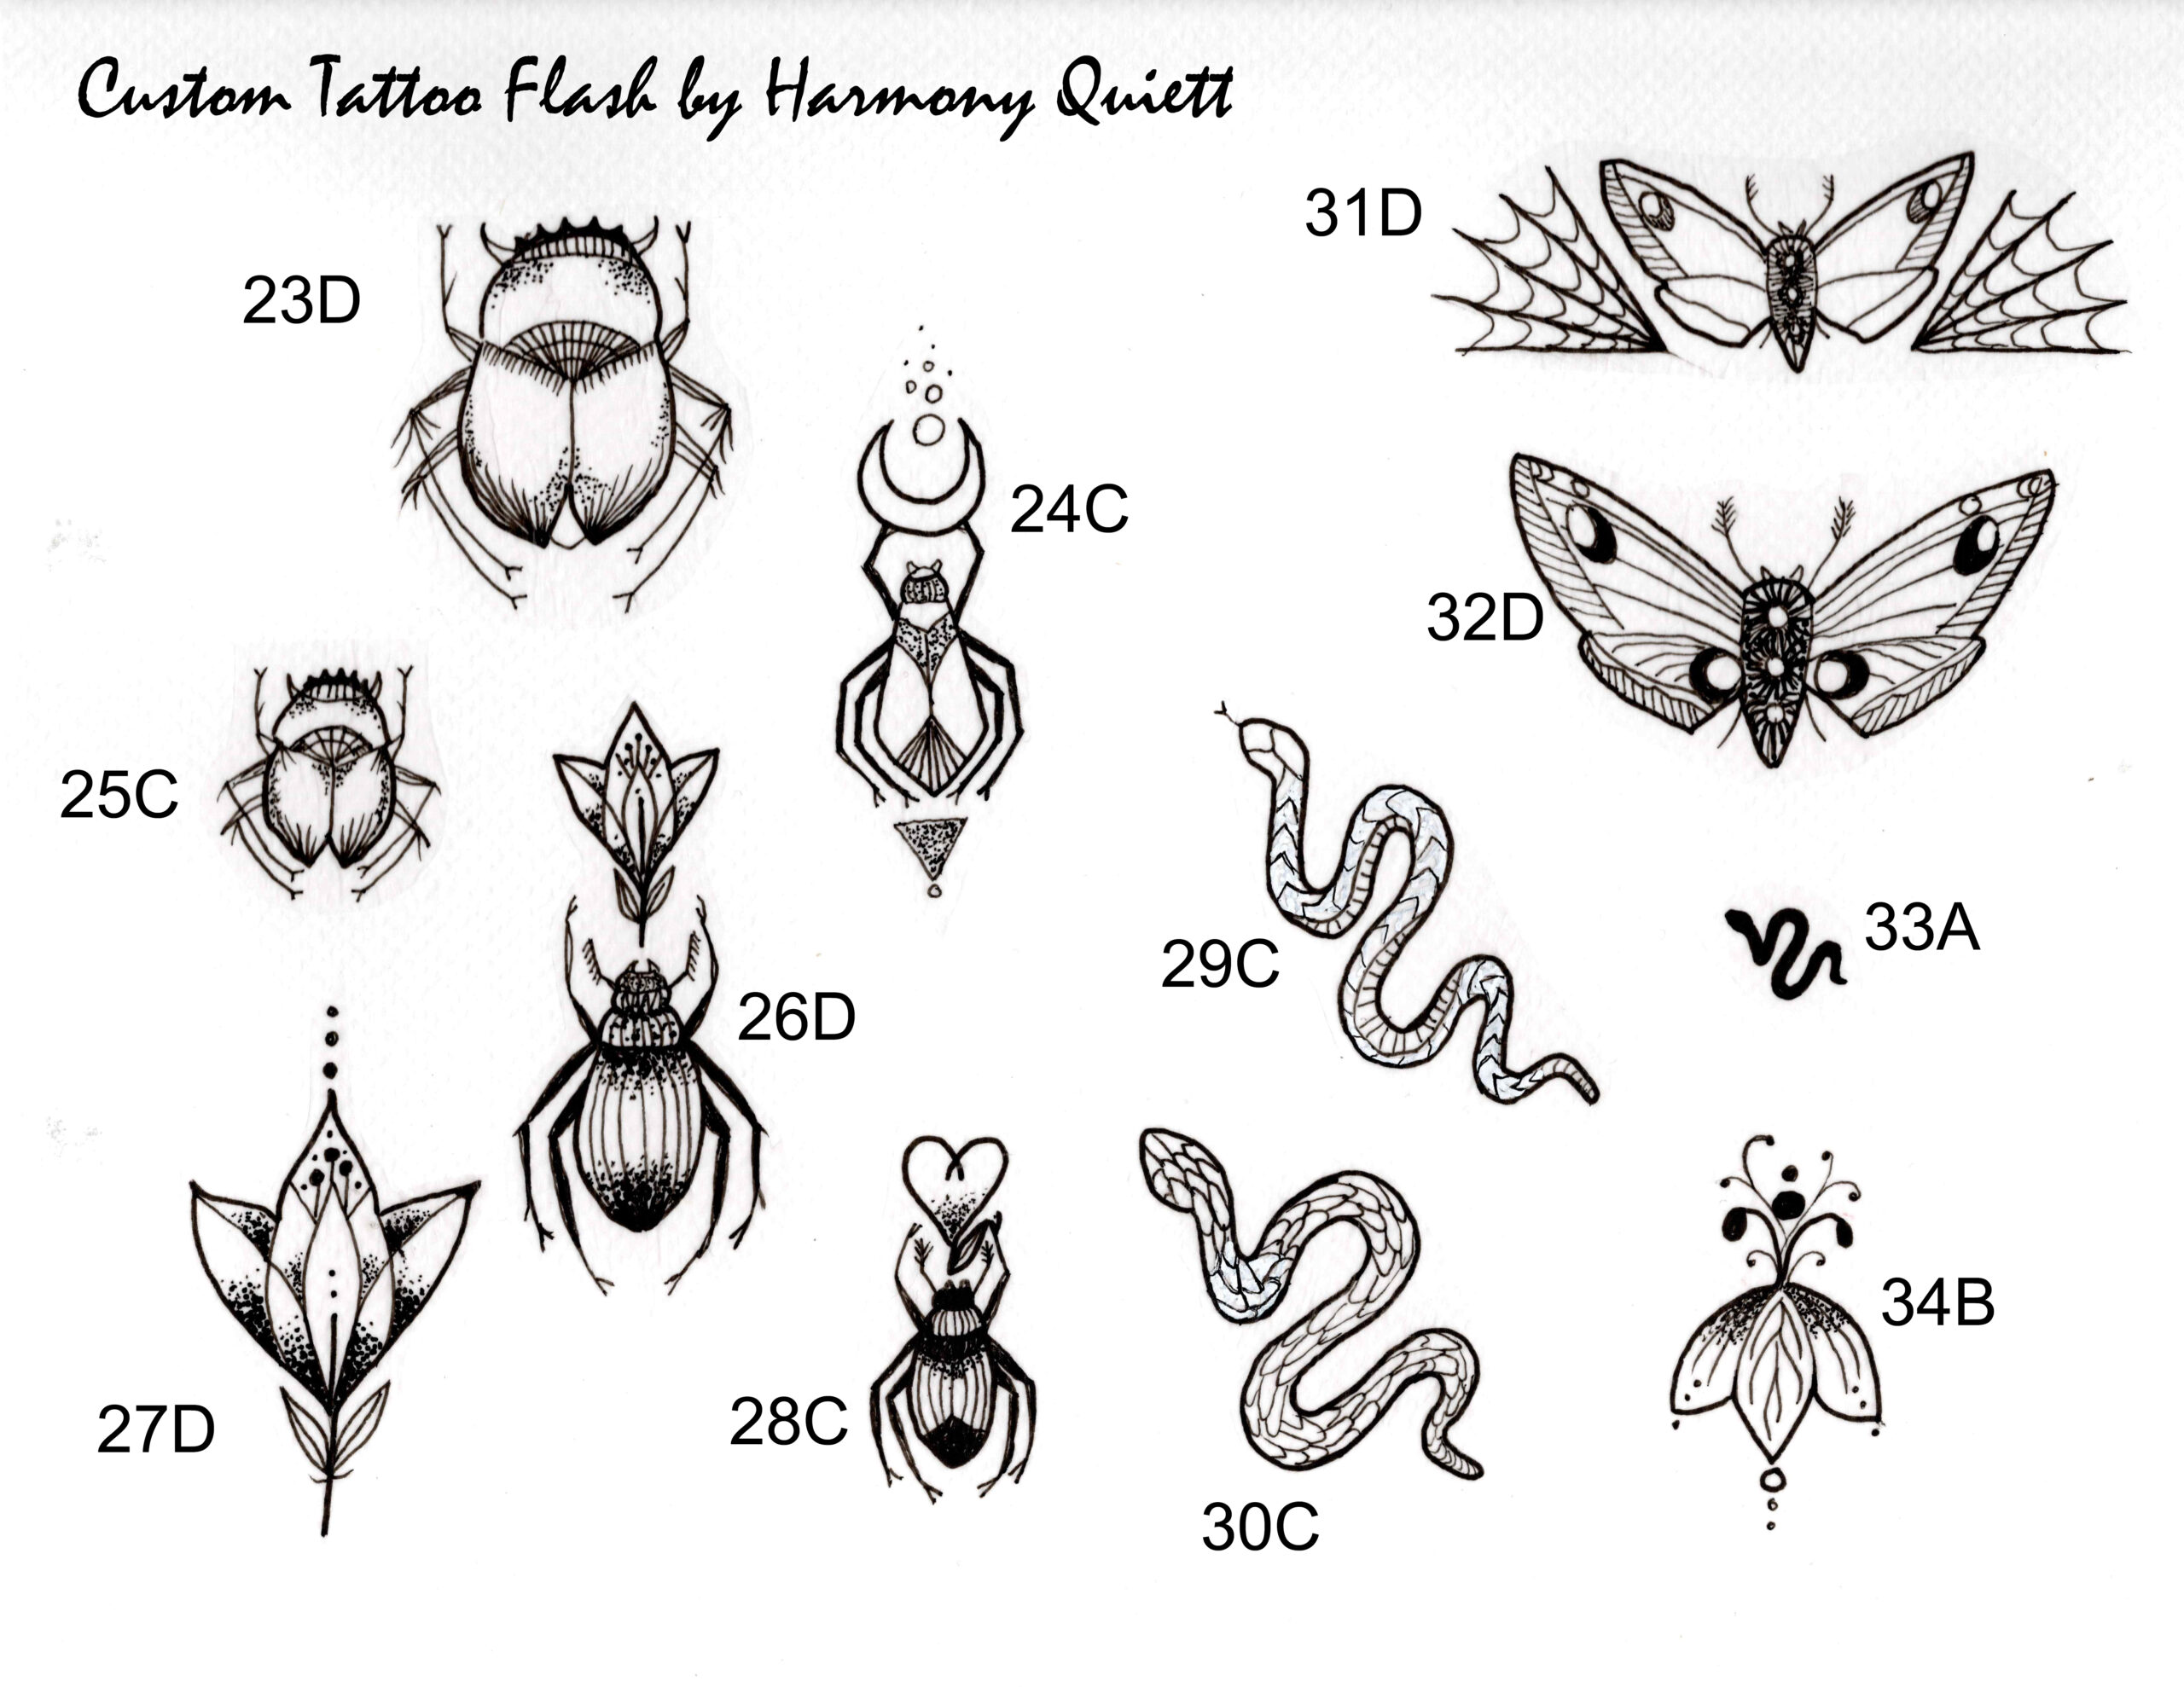 custom tattoo flash by harmony. snakes and insect designs